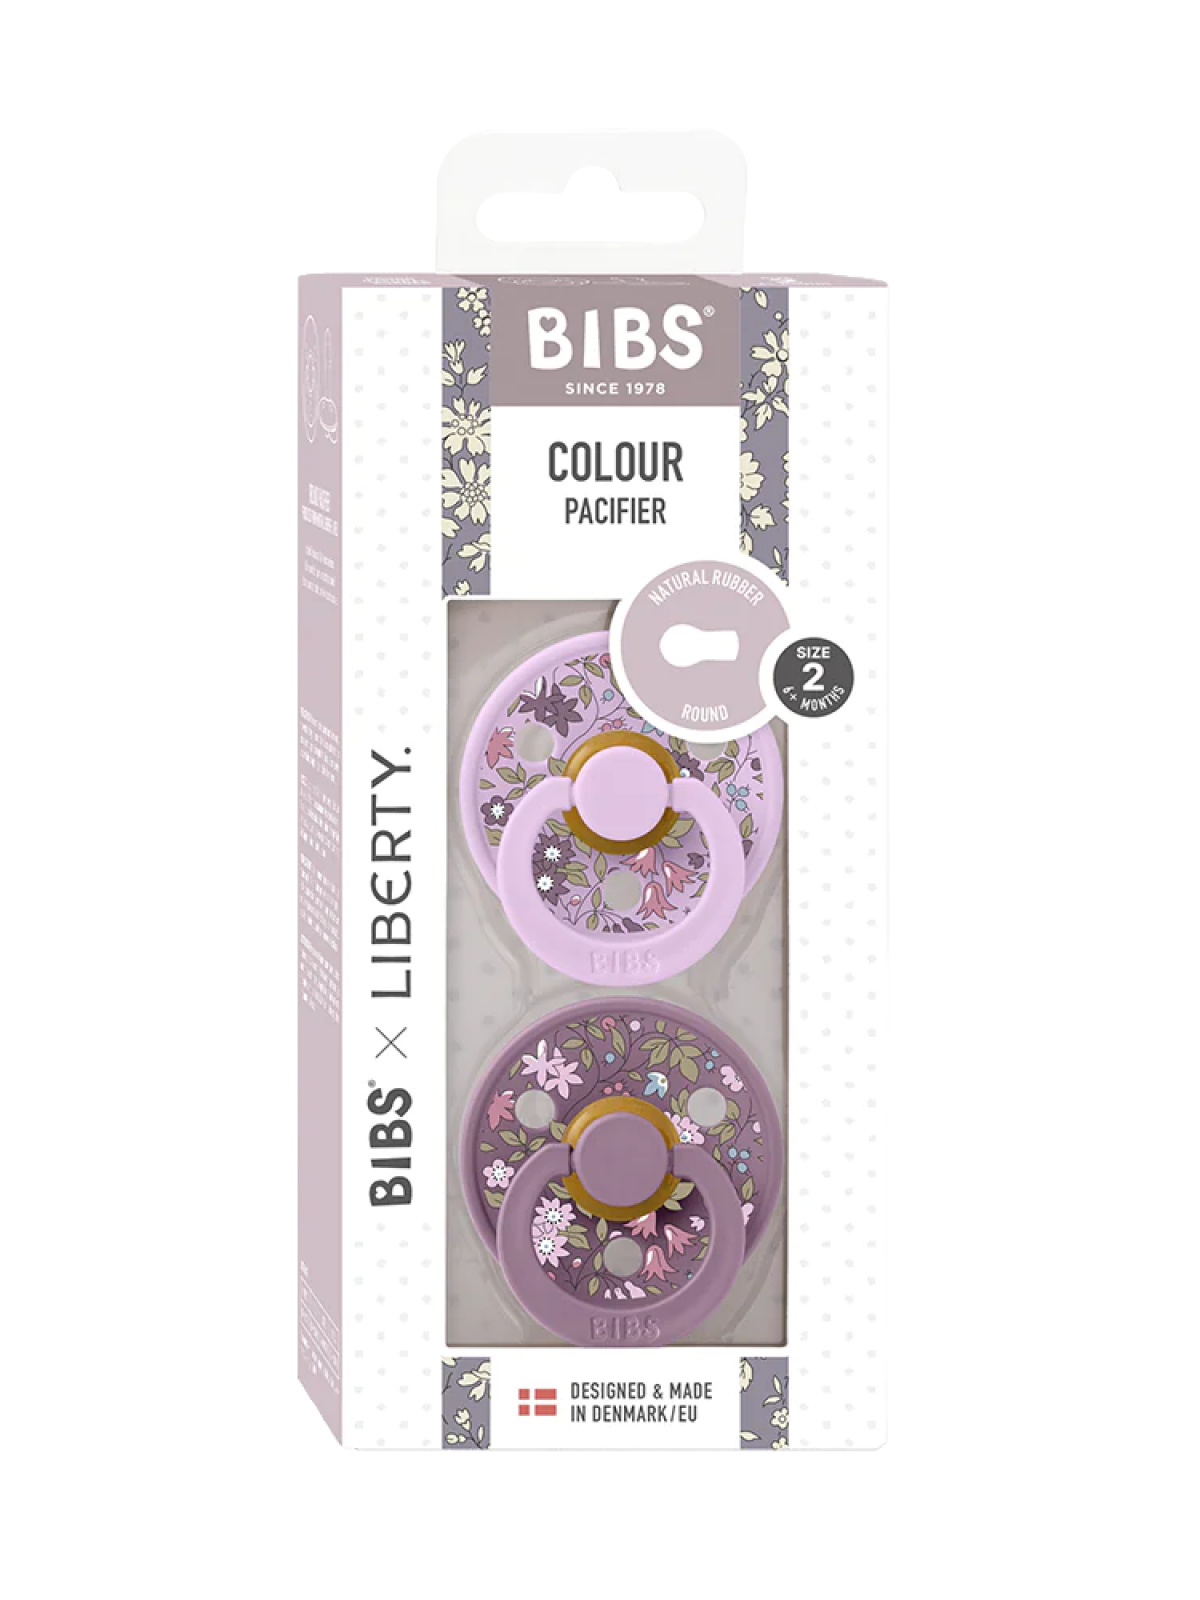 BIBS x LIBERTY Colour Round Natural Rubber Latex Pacifier 2 Pack, Chamomile Lawn Violet Sky Mix